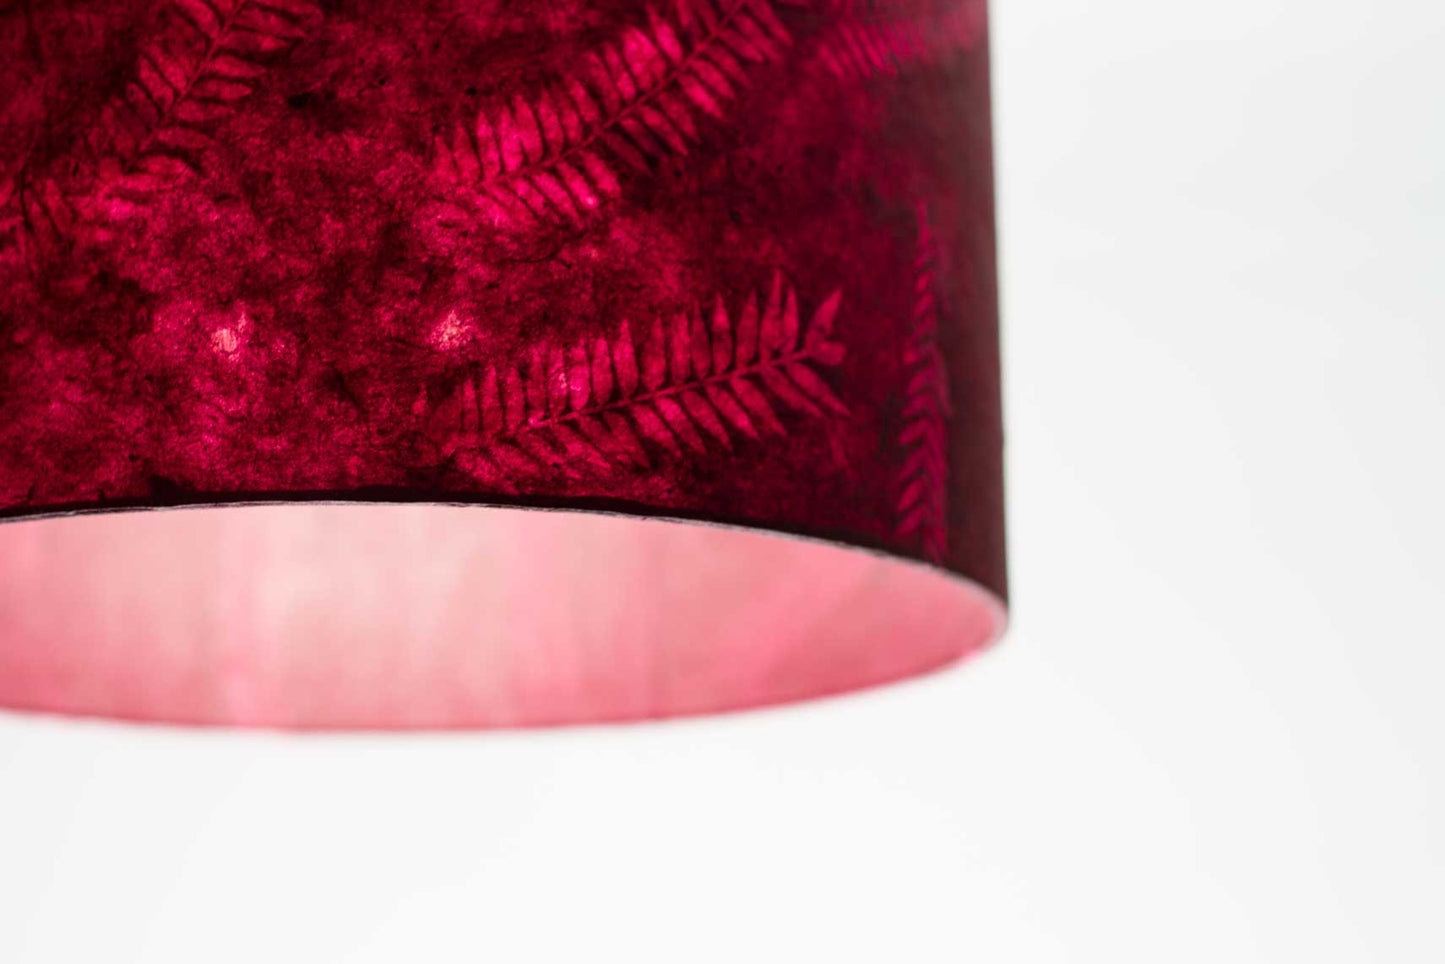 Oval Lamp Shade - P25 - Resistance Dyed Pink Fern, 30cm(w) x 20cm(h) x 22cm(d)